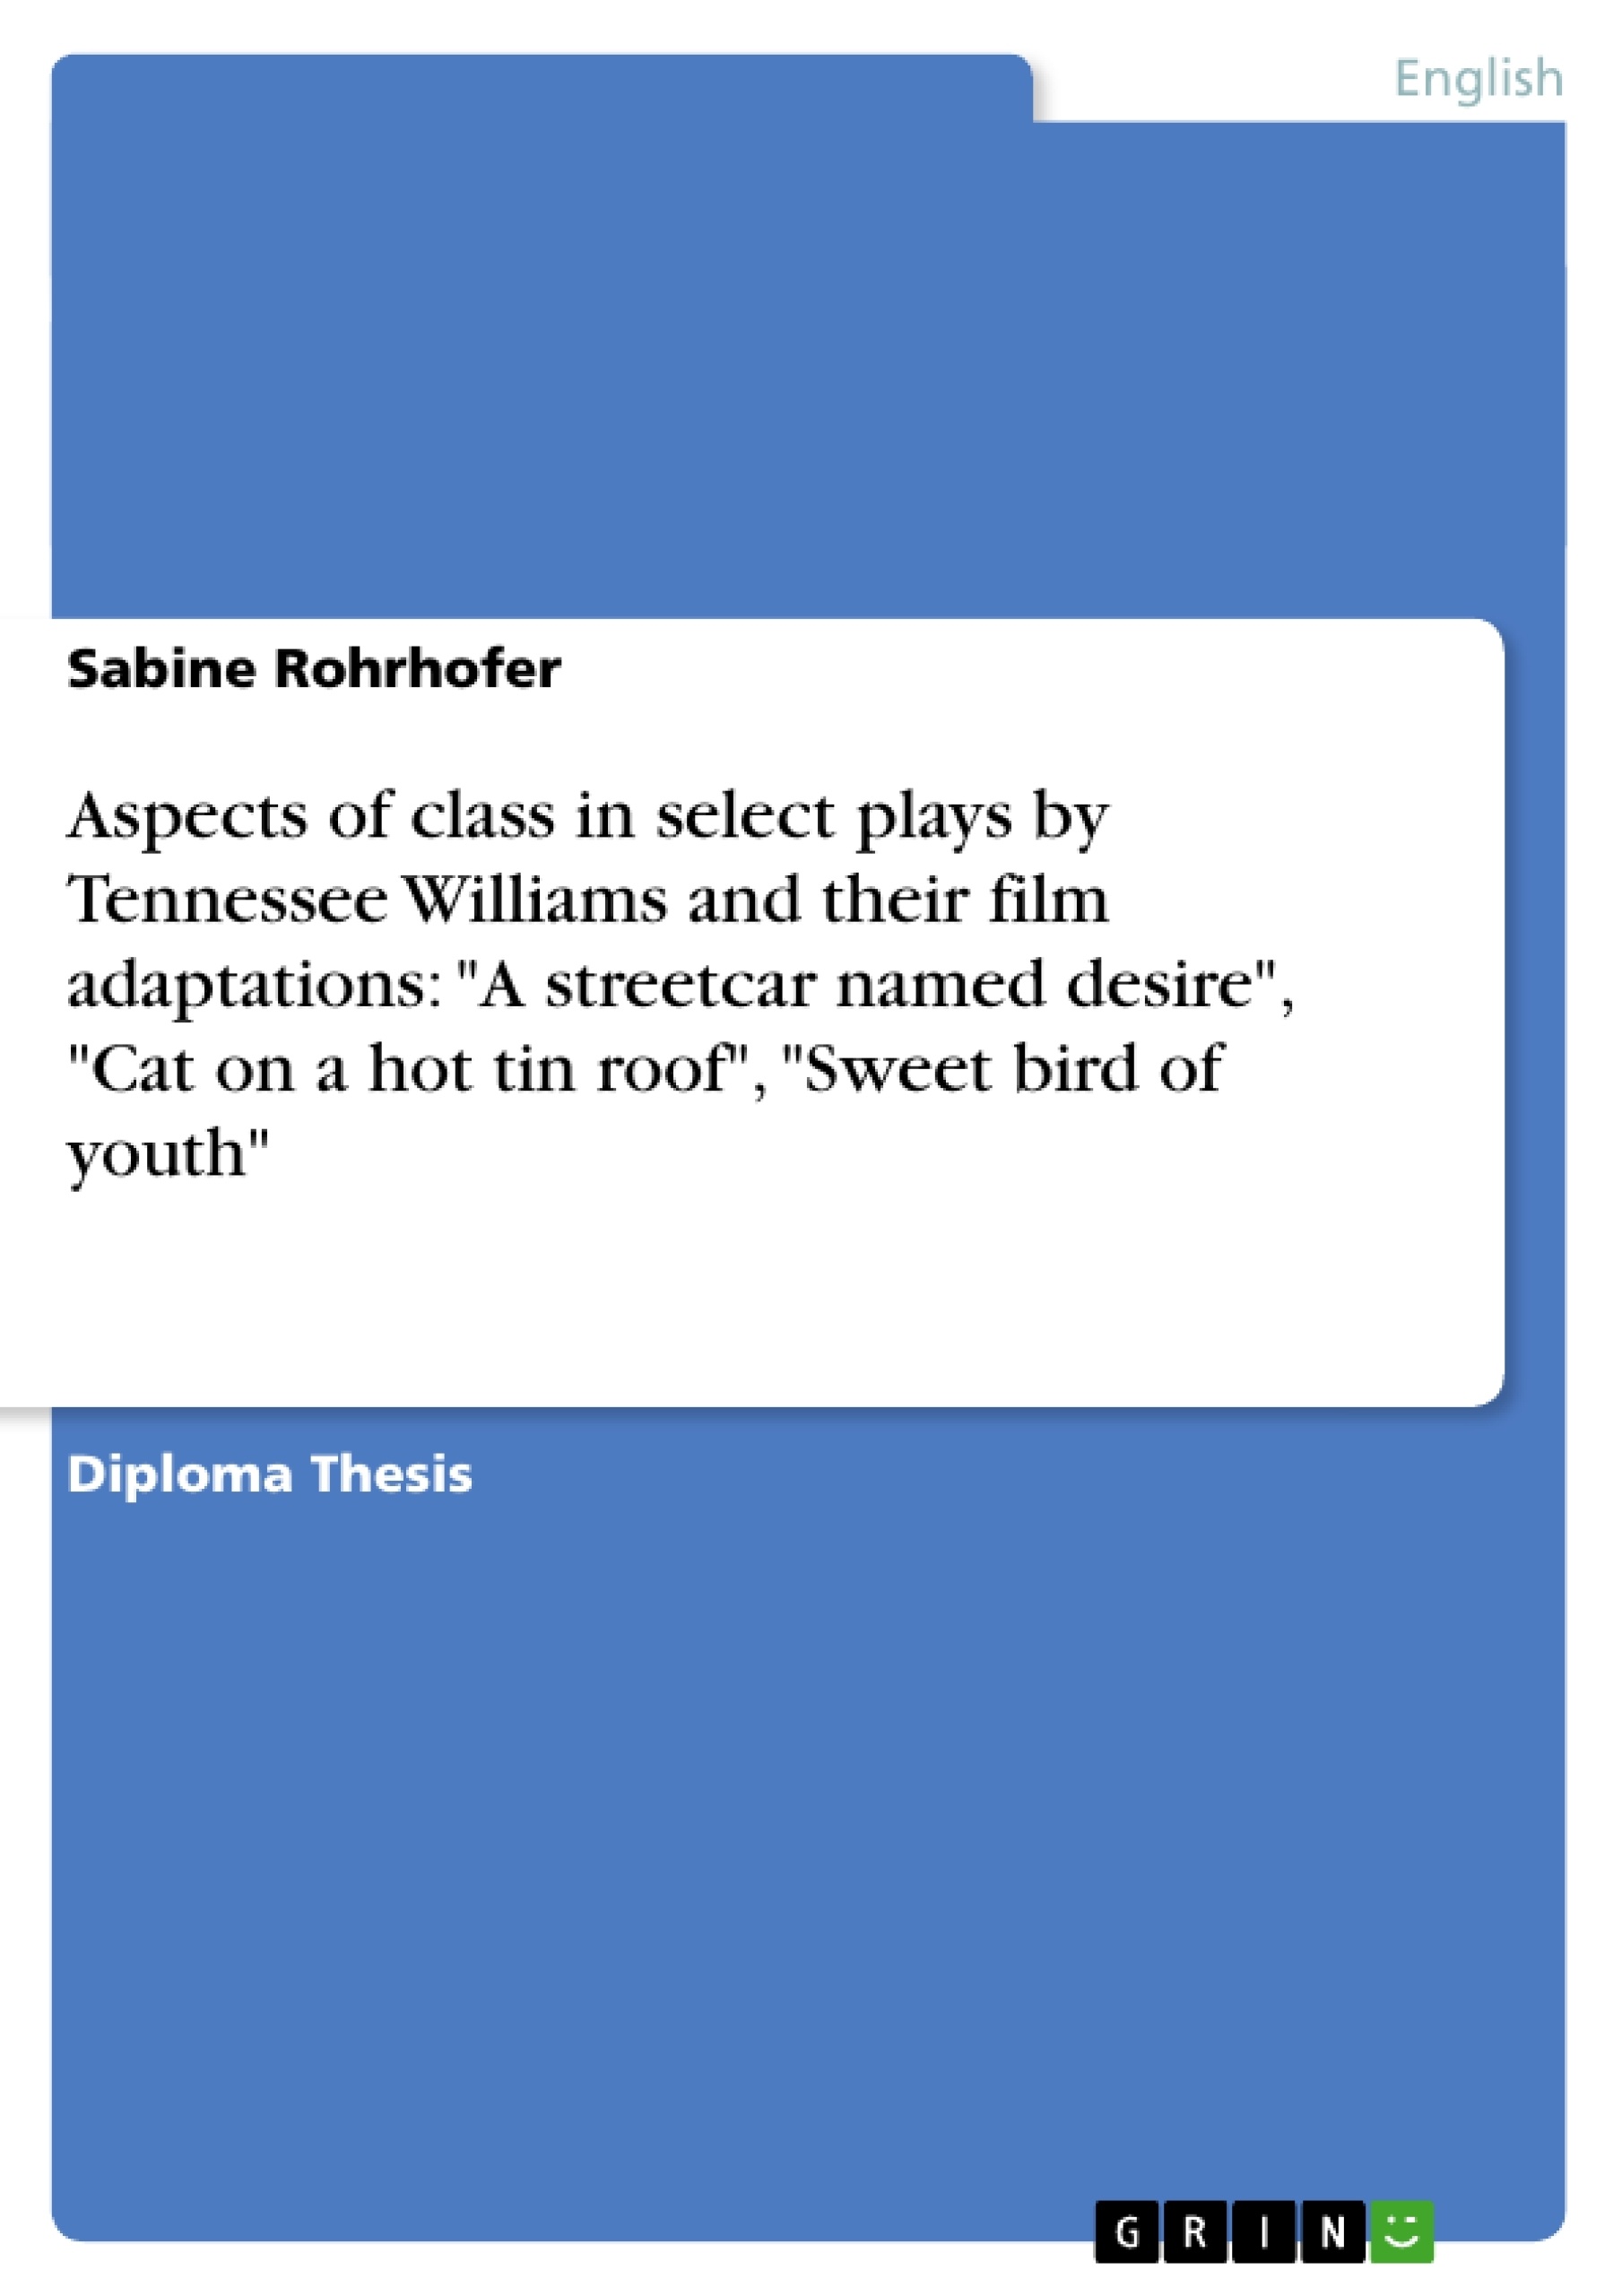 Title: Aspects of class in select plays by Tennessee Williams and their film adaptations:  "A streetcar named desire",  "Cat on a hot tin roof",  "Sweet bird of youth"